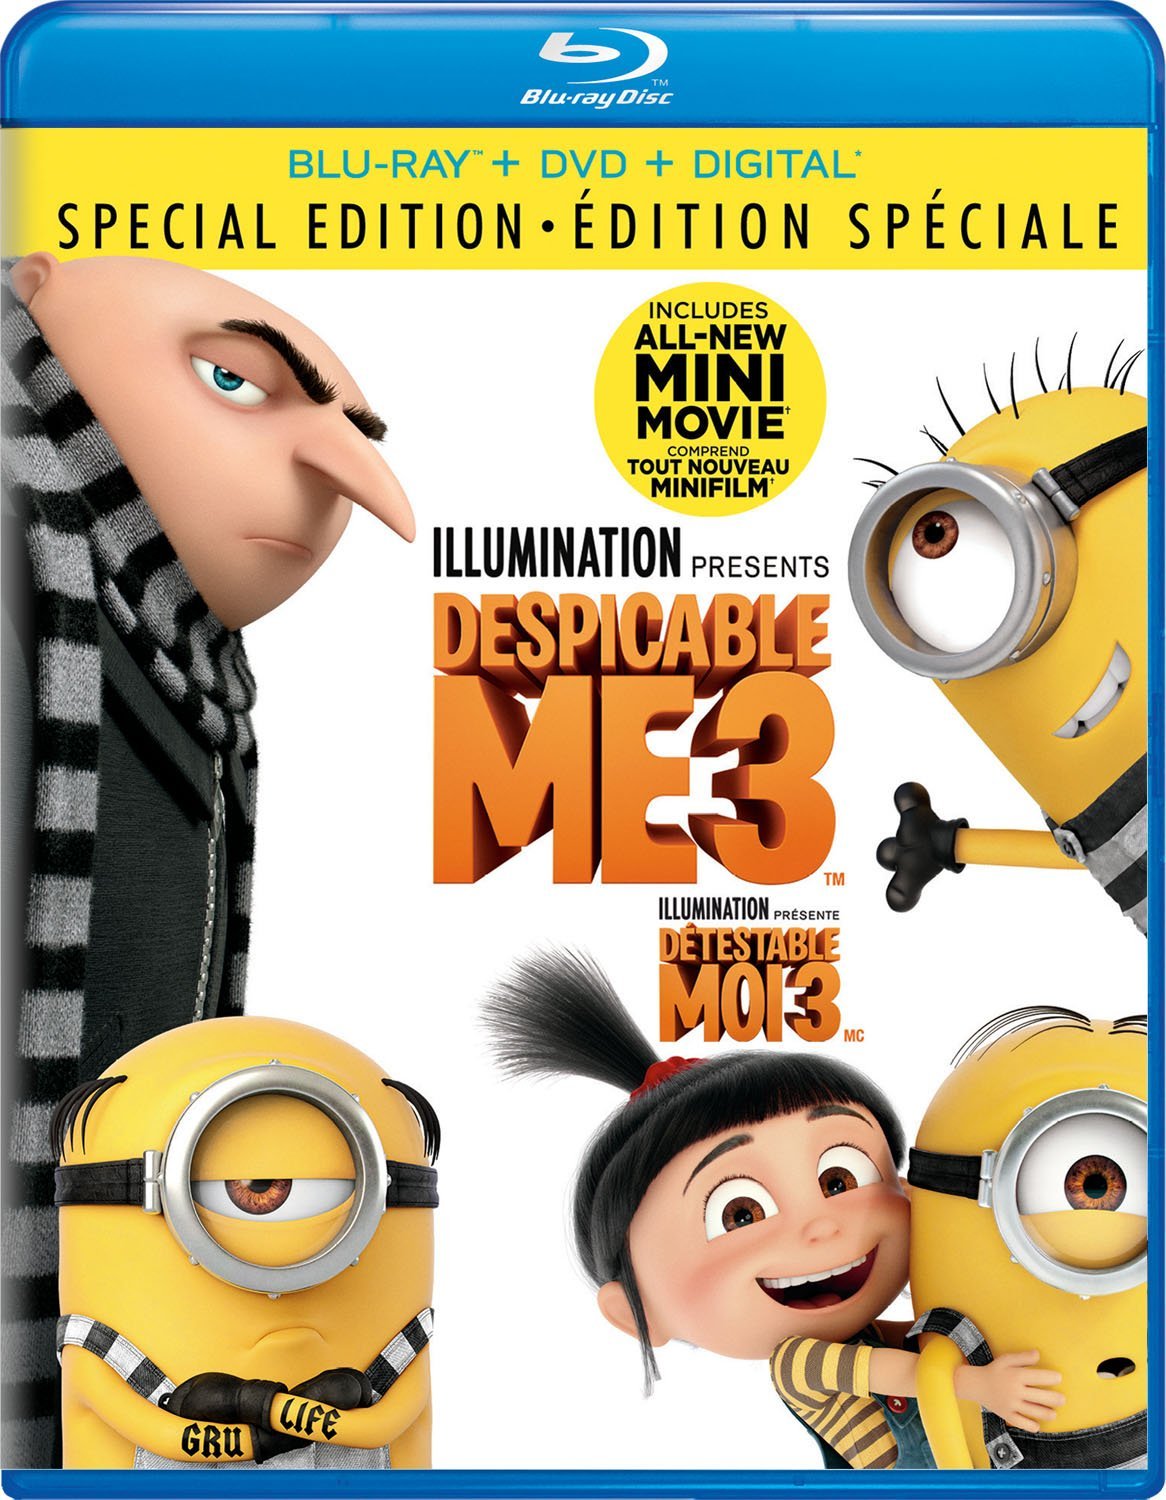 Despicable Me 3 now available on Blu-ray, DVD and Digital.